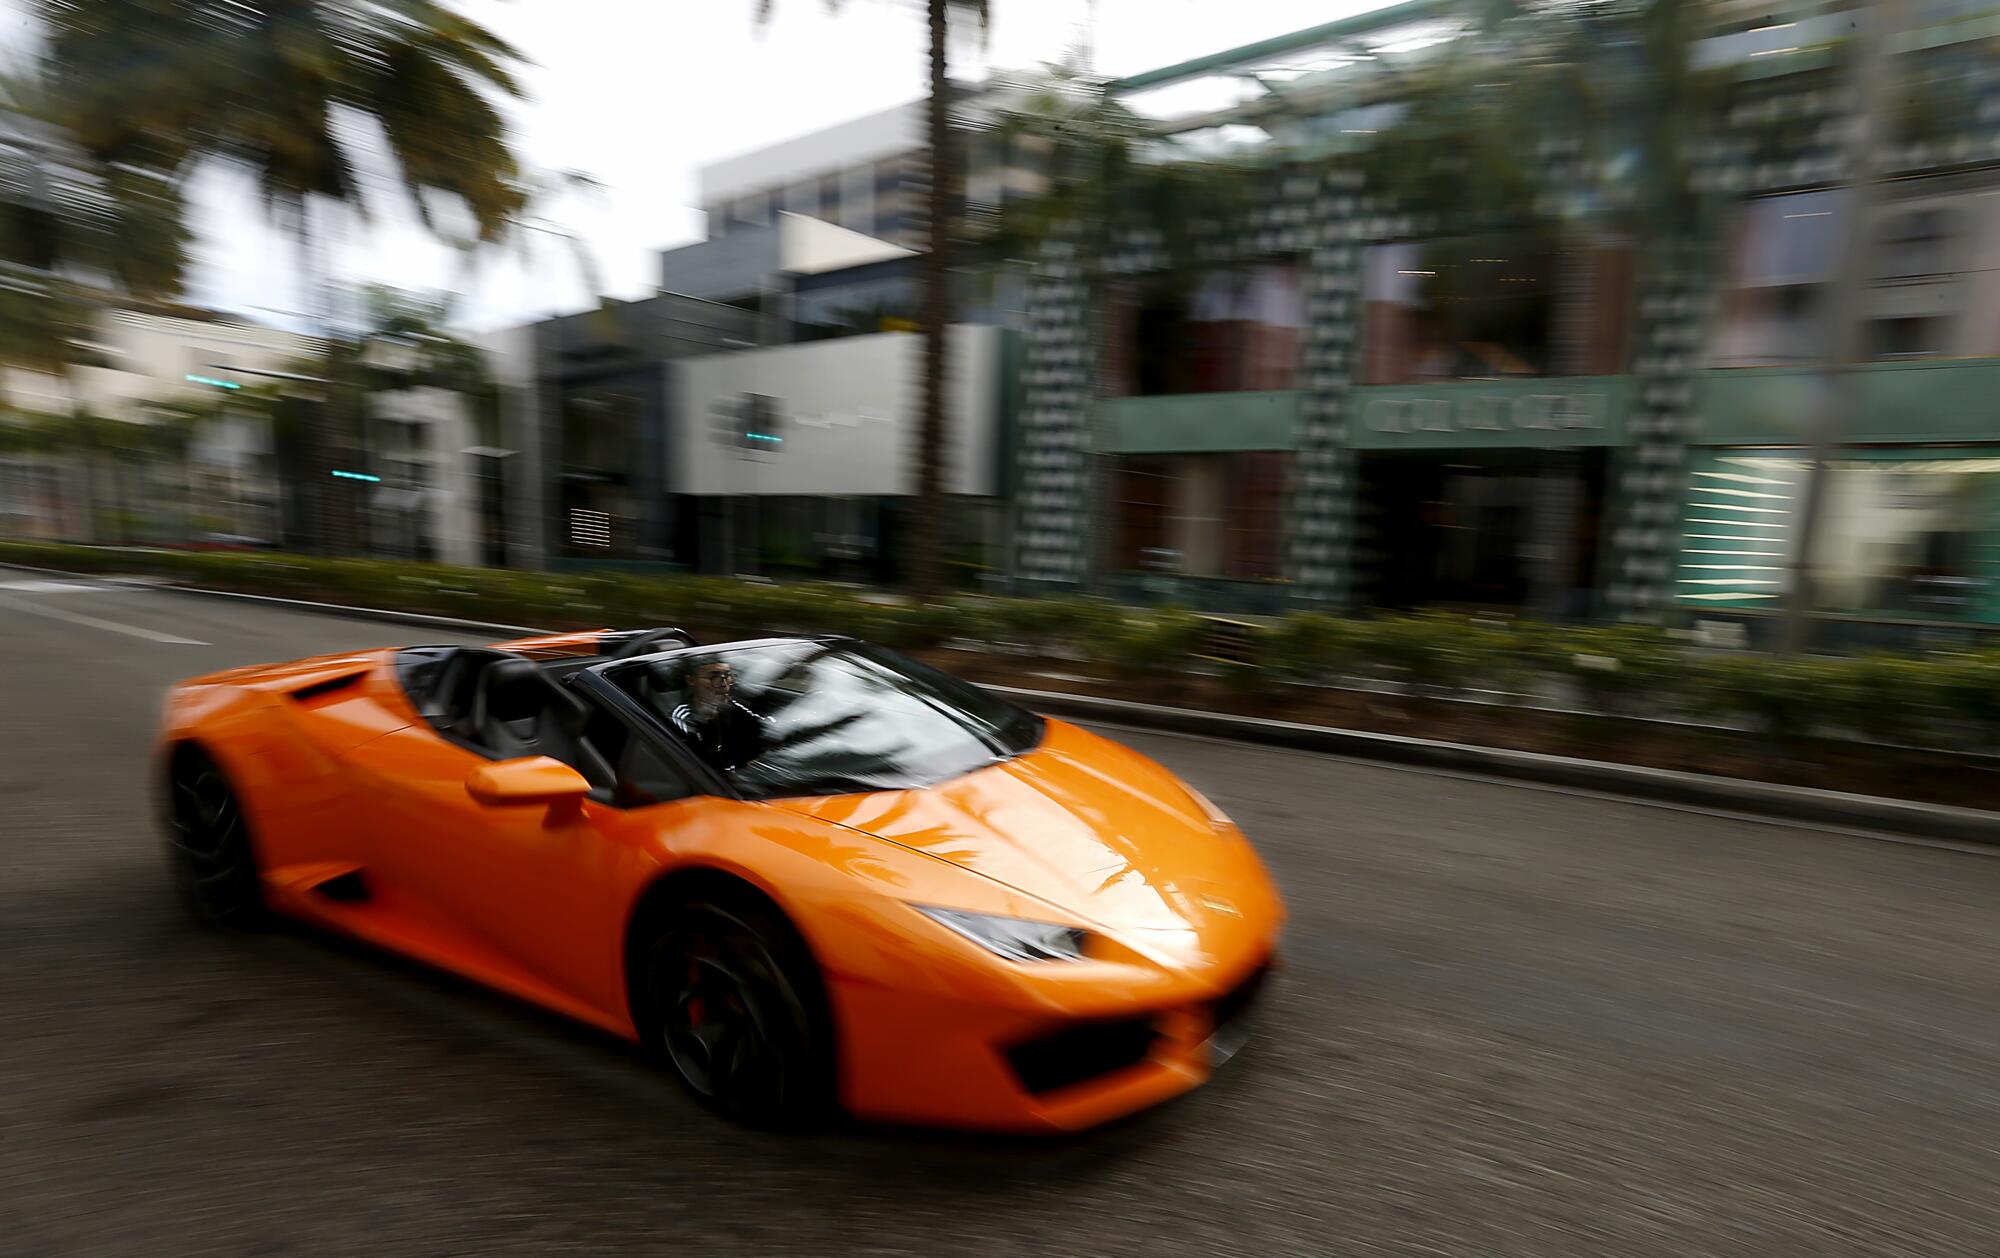 A young man drives a sports car down Rodeo Drive in Beverly Hills, where shops were closed and streets largely devoid of people and motor traffic.